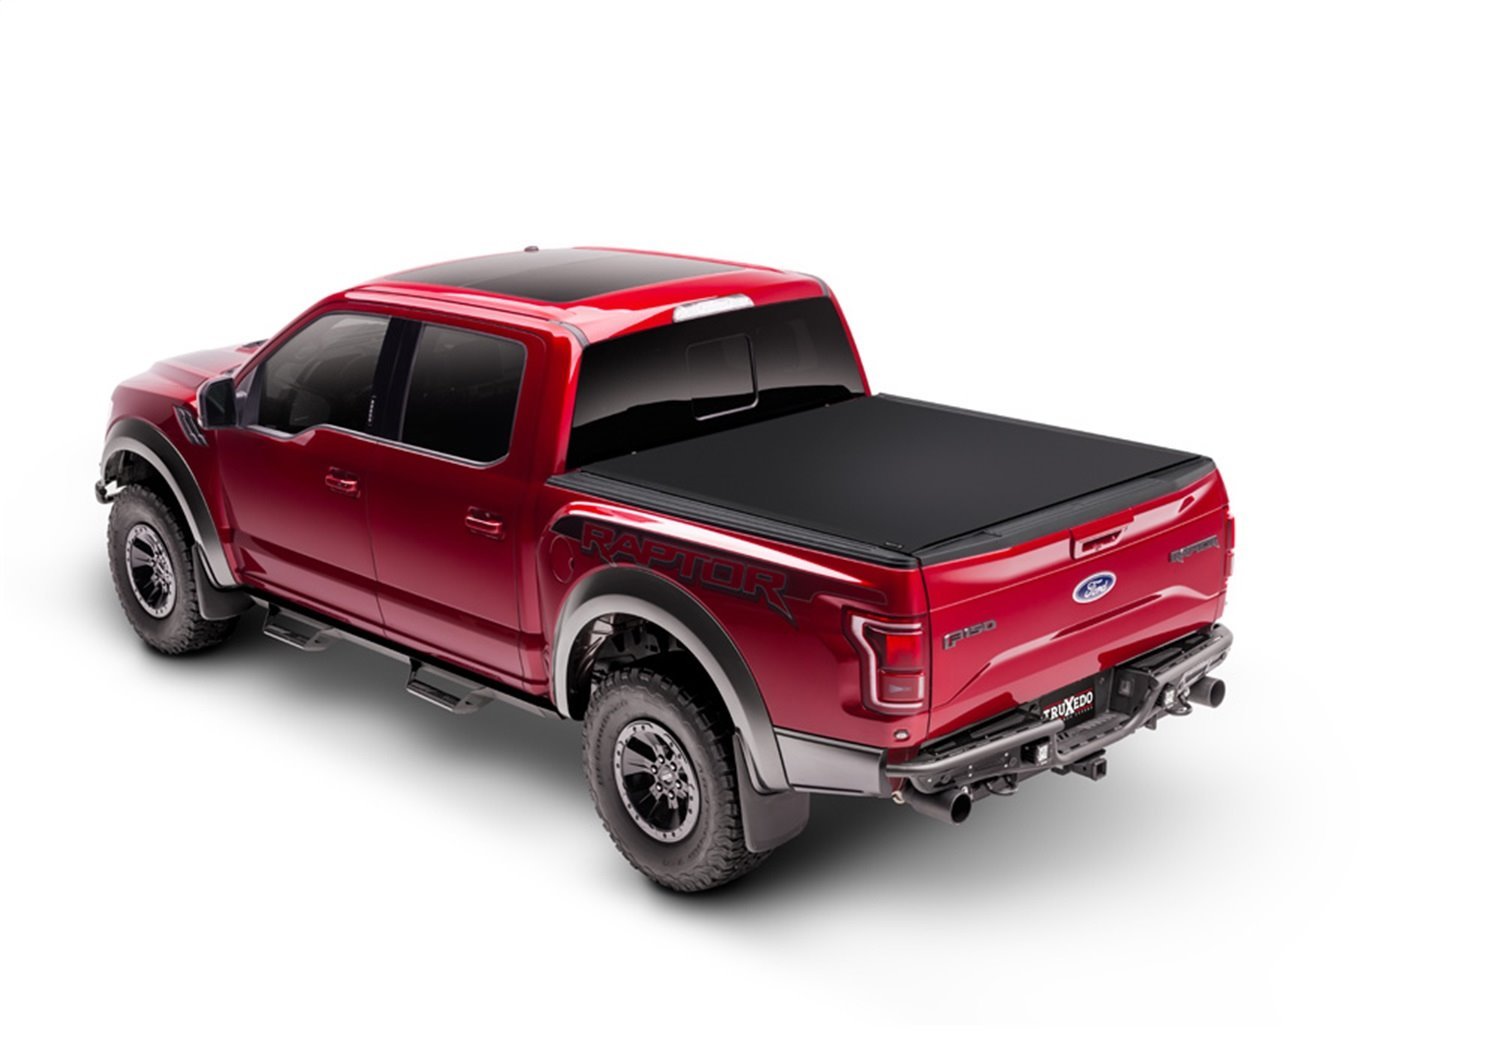 1598116 Sentry CT Hard Roll-Up Tonneau Cover Fits Select Ford F-150 Pickups w/6 ft. 7 in. Bed [Matte Black]